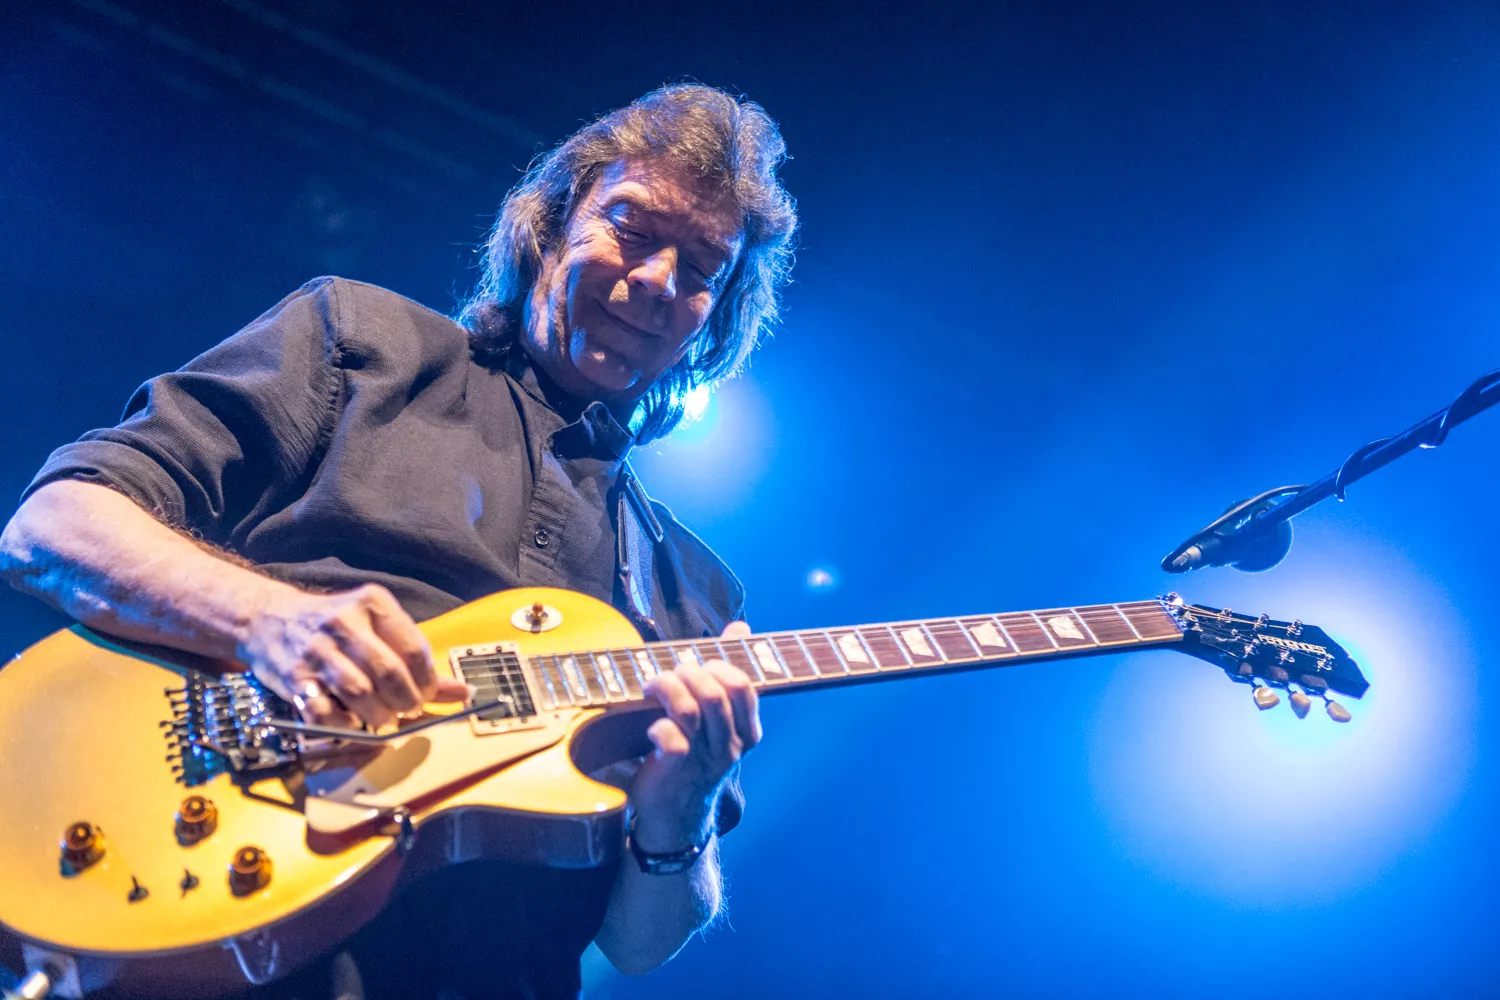 Genesis Revisited with Classic Hackett Tour, Amager Bio - Steve Hackett